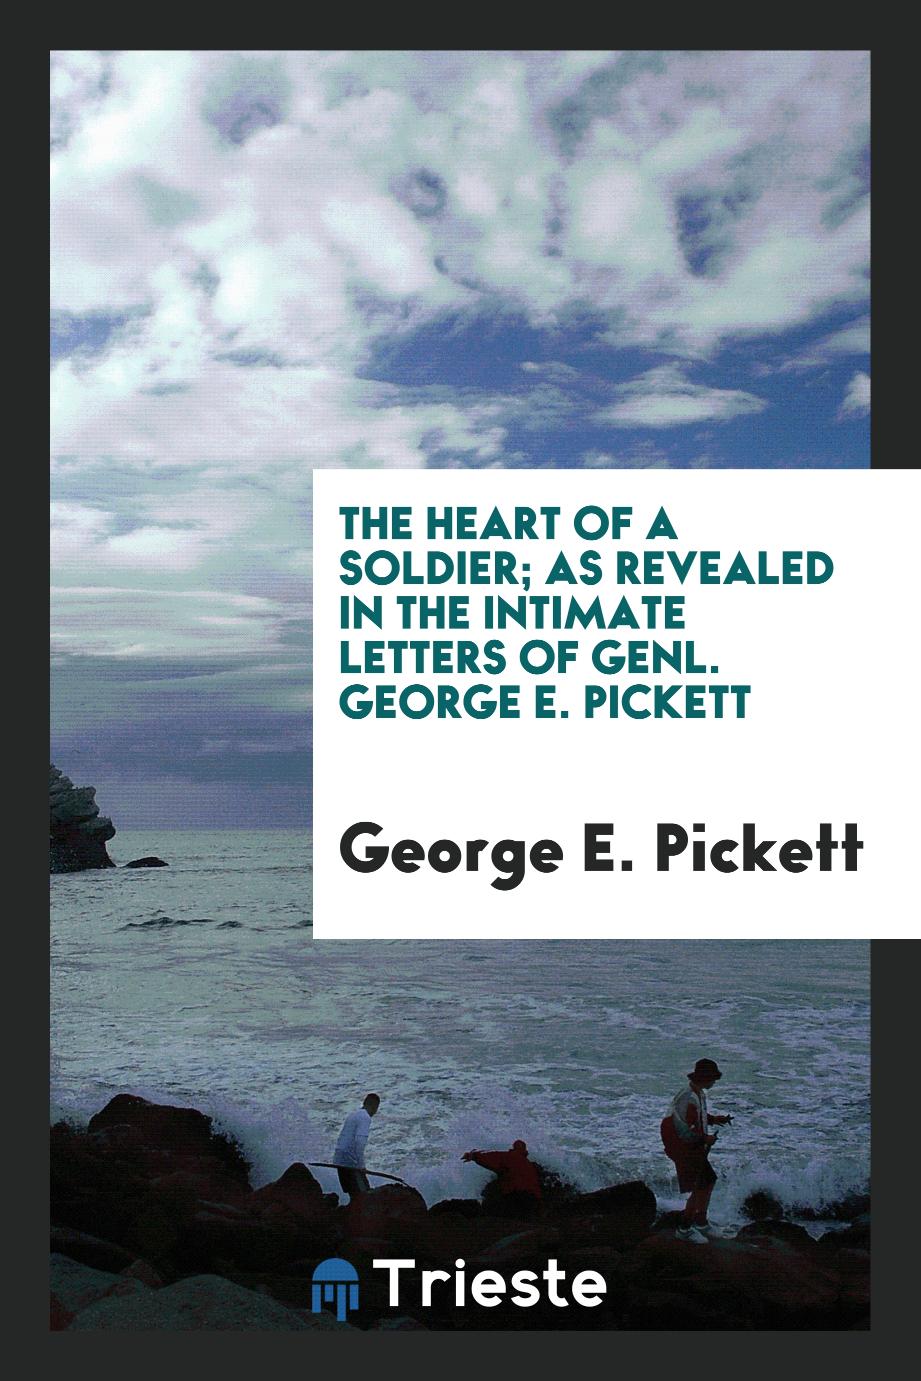 The heart of a soldier; as revealed in the intimate letters of Genl. George E. Pickett